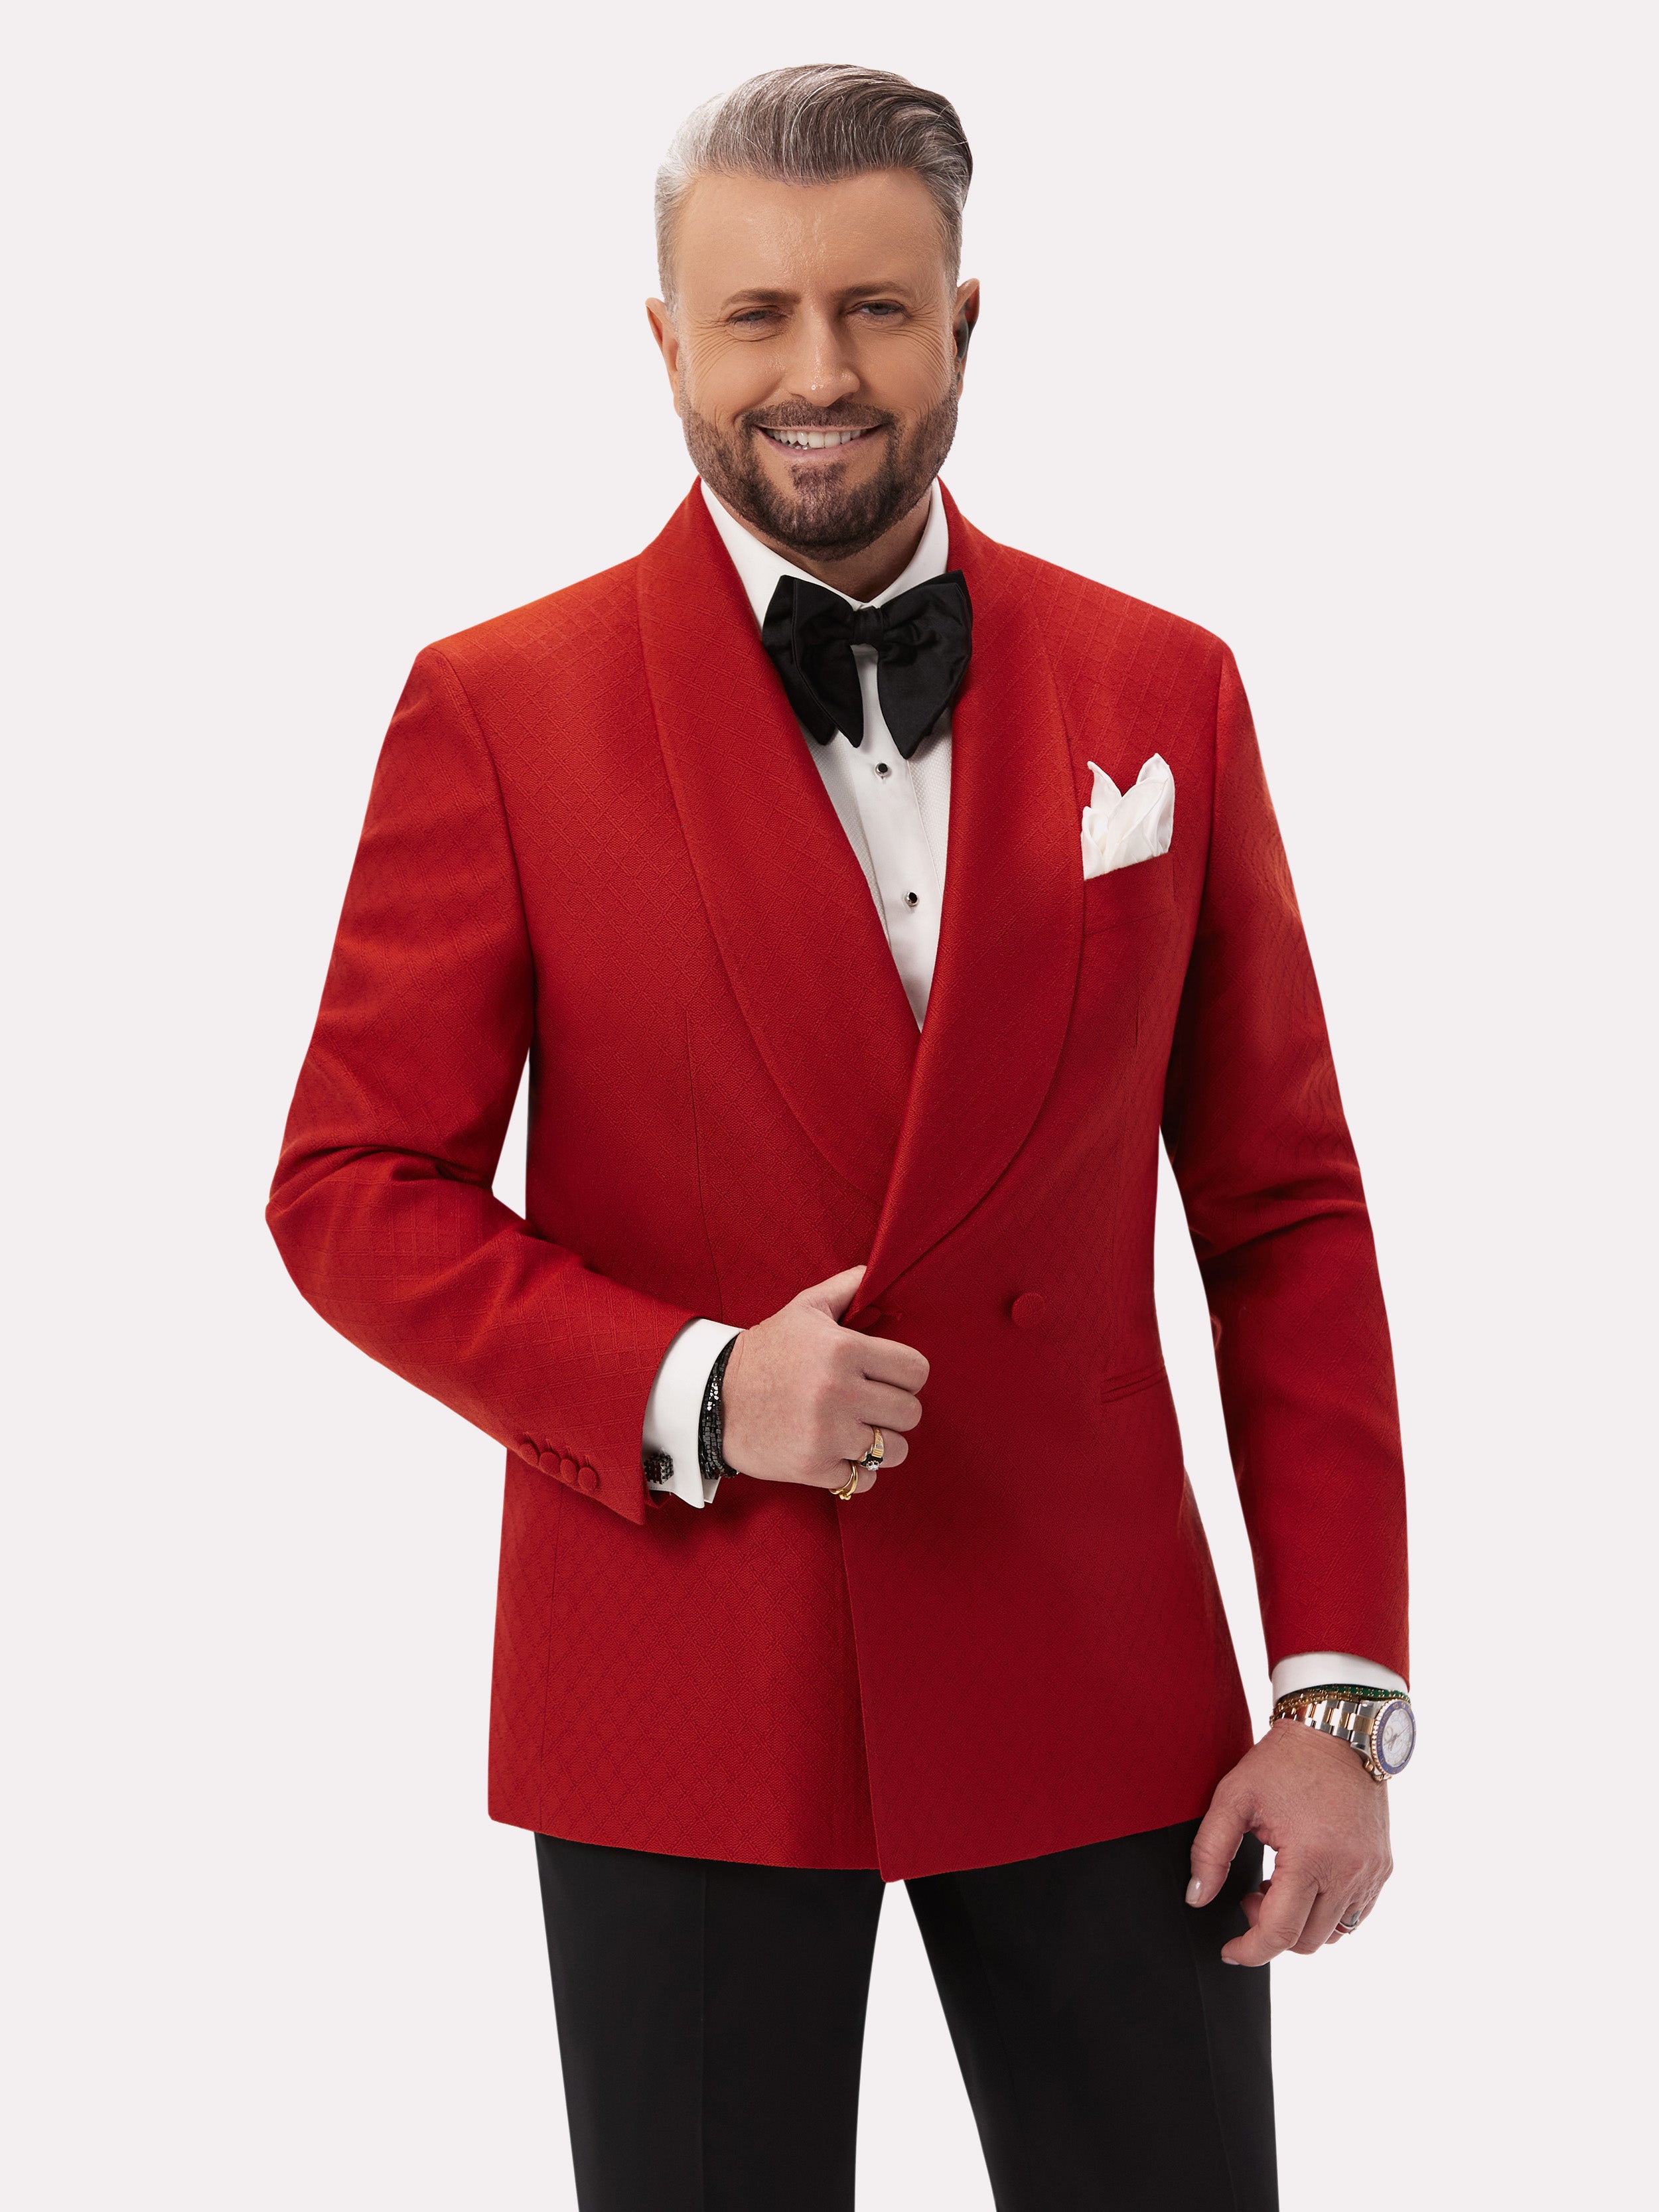 Red tuxedo jacket with two rows of buttons